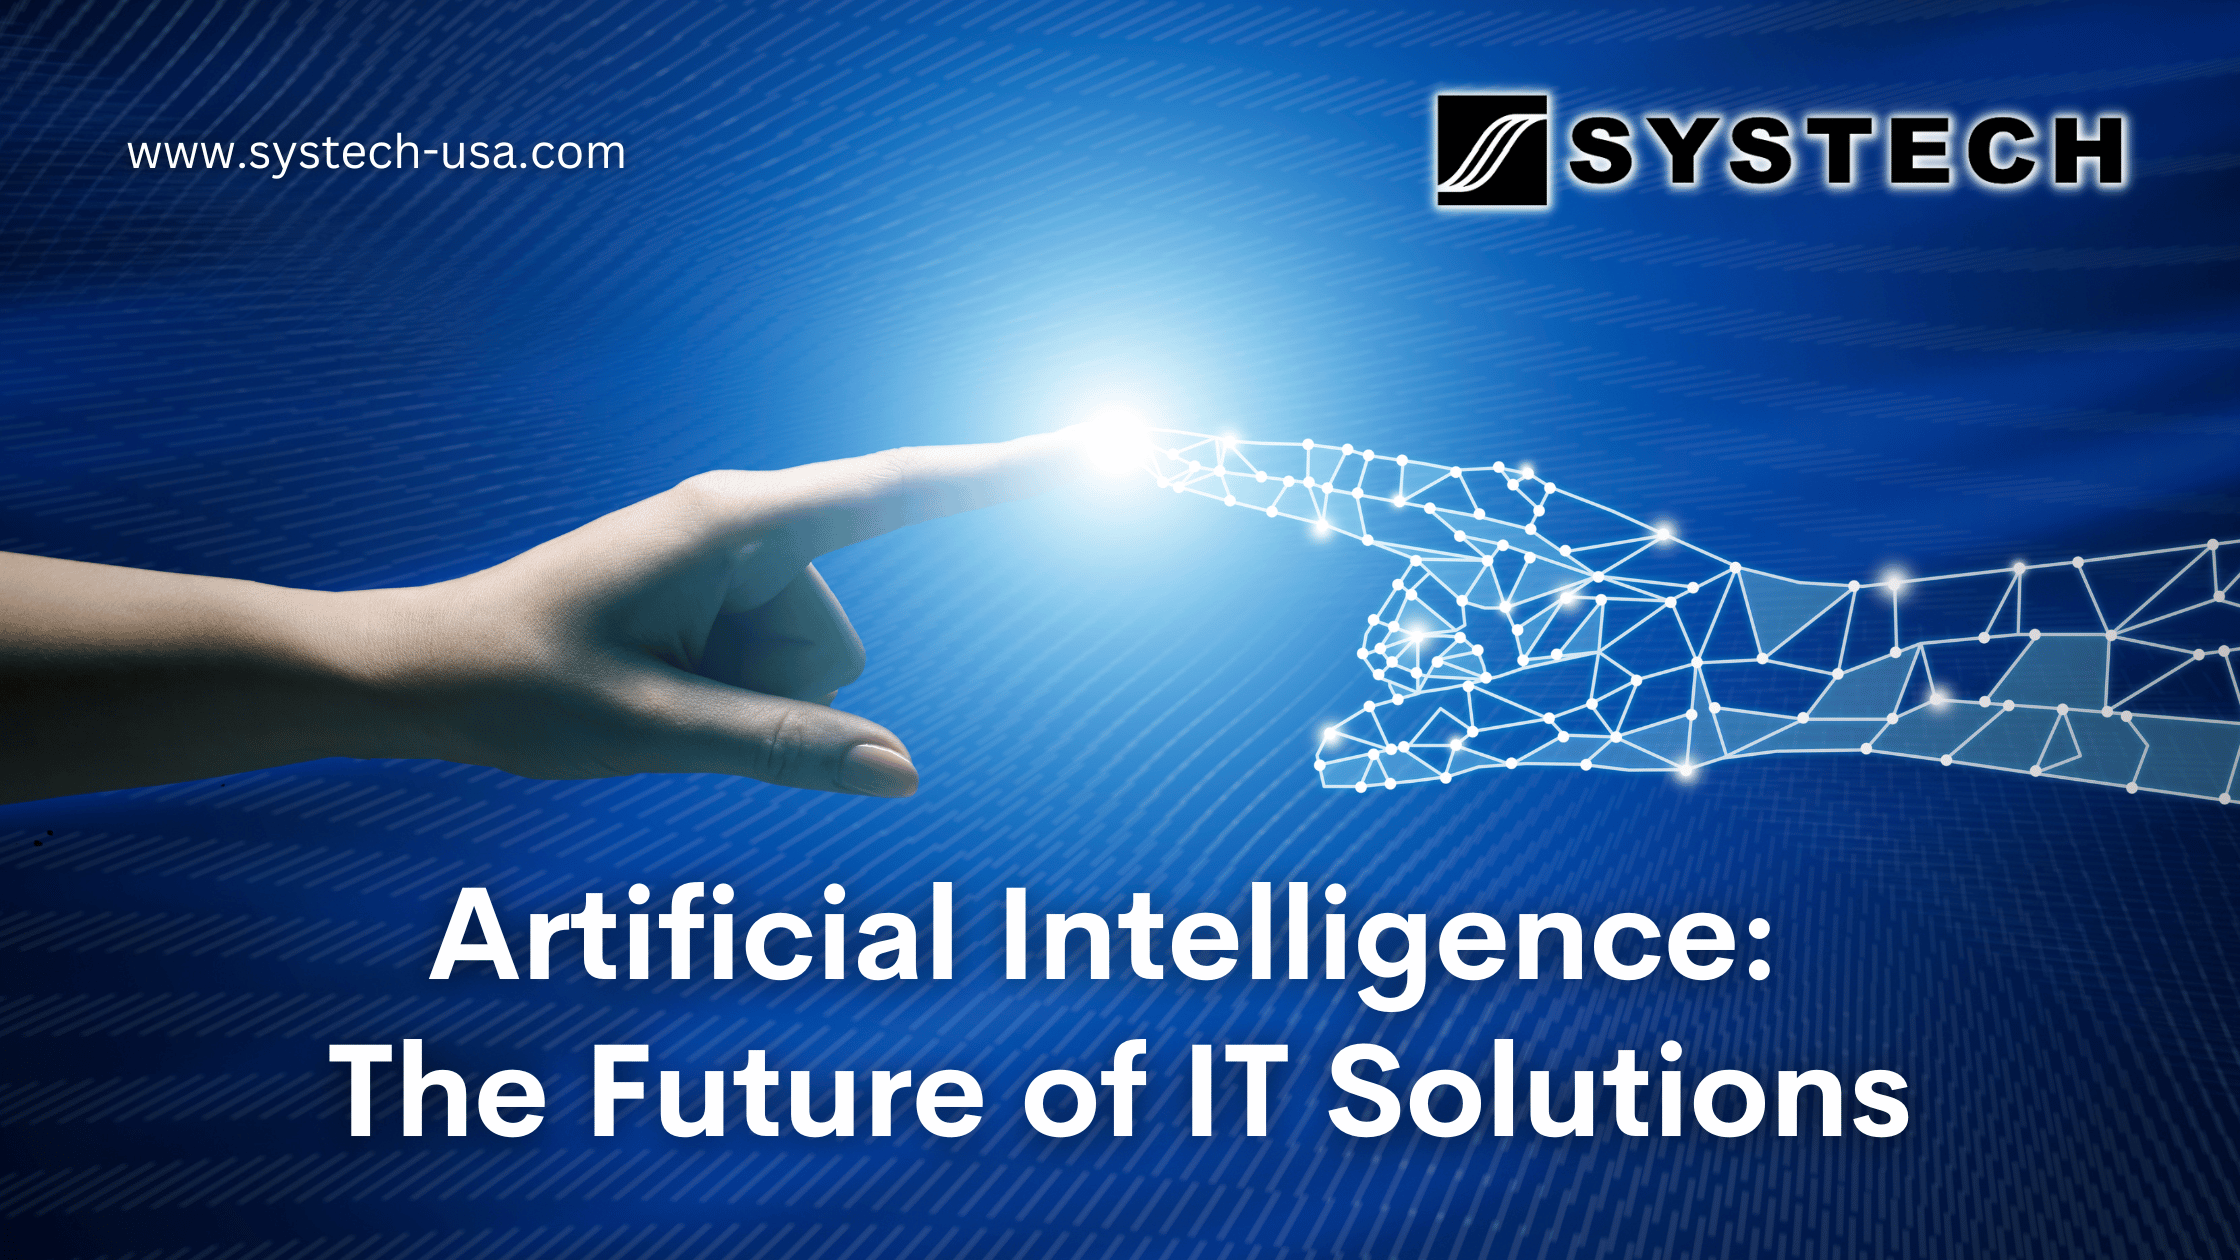 Artificial Intelligence (AI) is being increasingly utilized in the IT industry to create innovative solutions for various business problems. AI-powered IT solutions can automate manual tasks, improve decision-making processes, and increase efficiency.